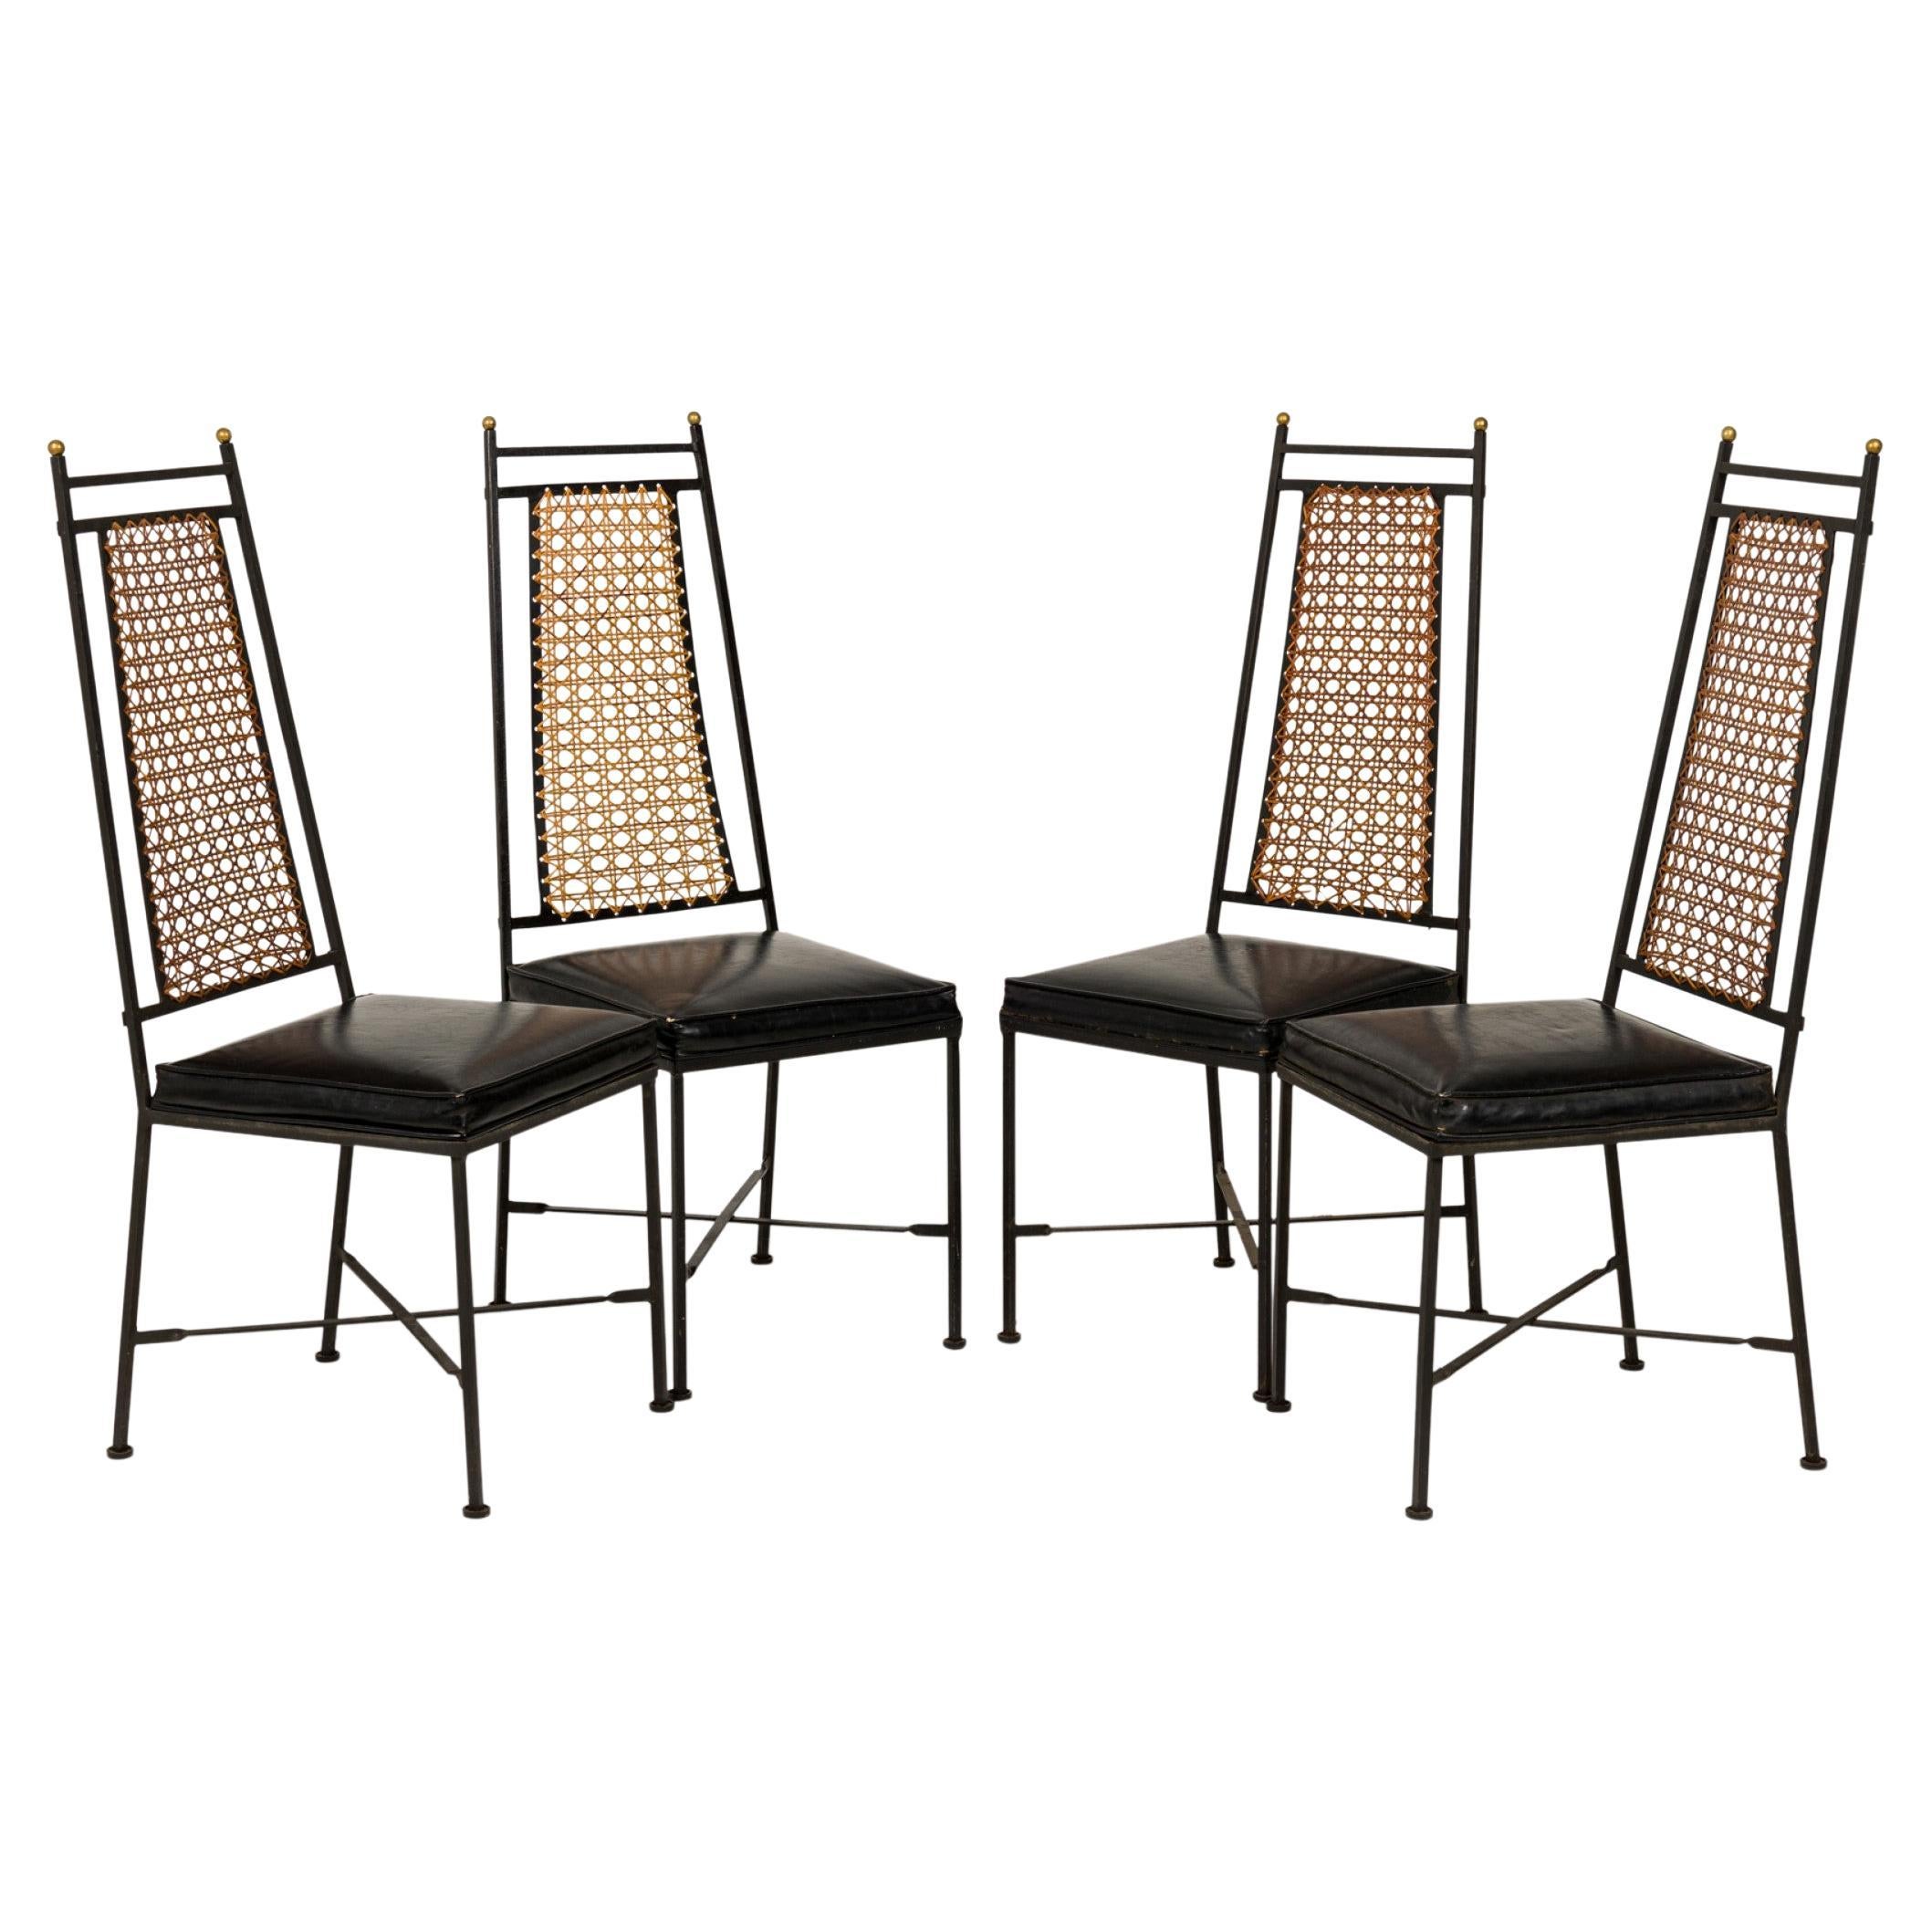 Set of 6 American Mid-Century Tapered Back Wrought Iron Caned Seat Dining / Side